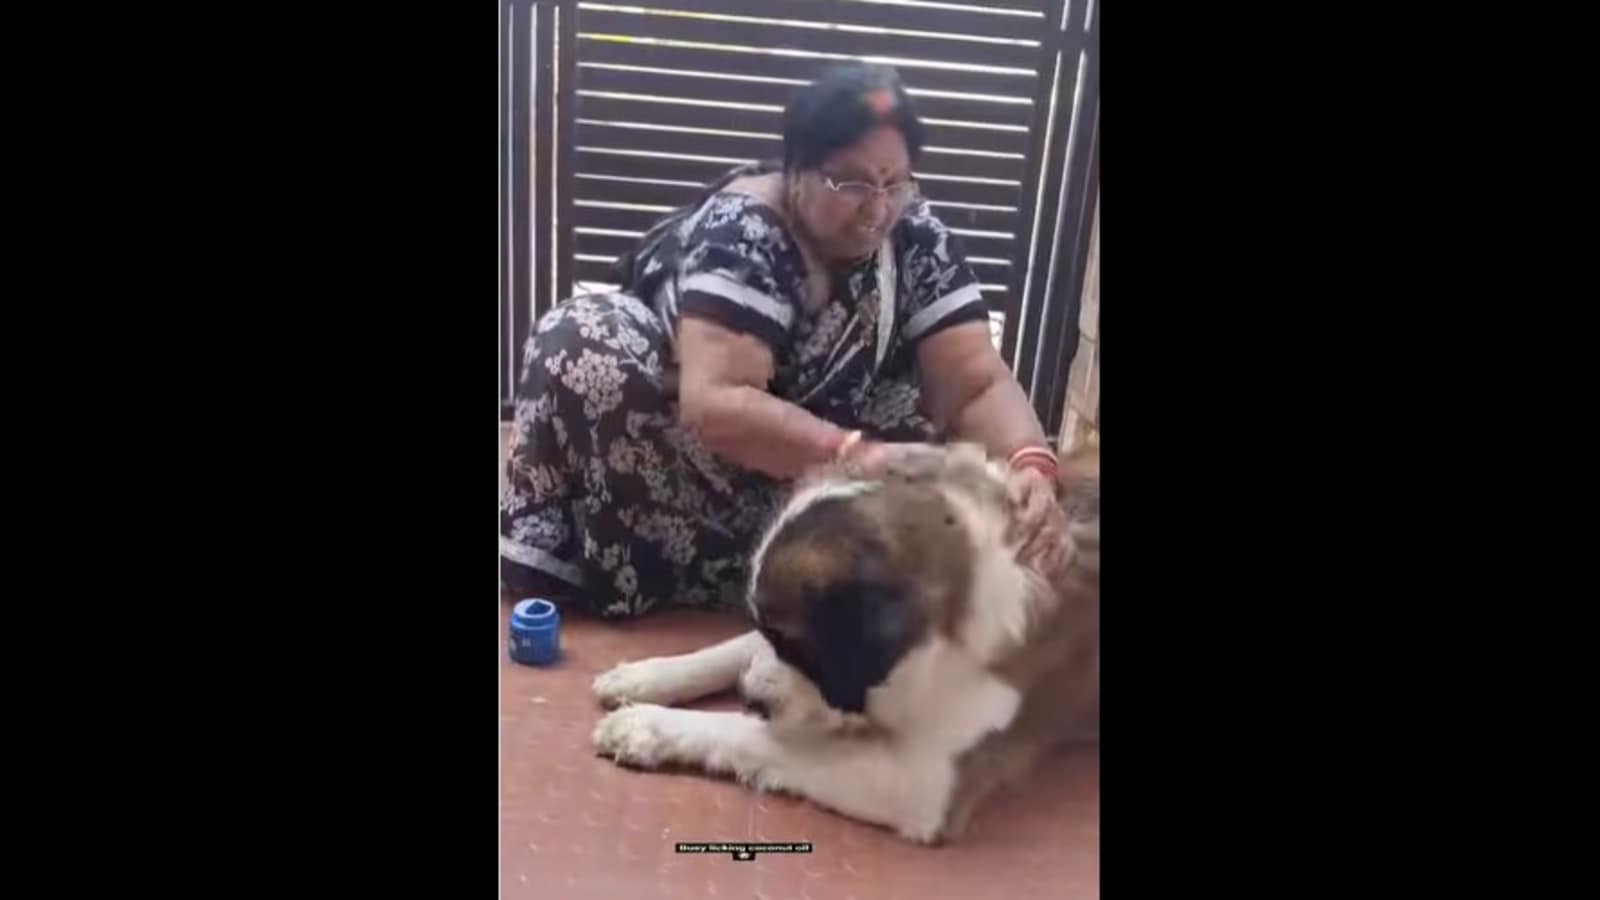 Cute_doggo_getting_oil_massage_from_mom_before_bath_time_is_adorable_to_watch_1644045441704_1644045468271.png